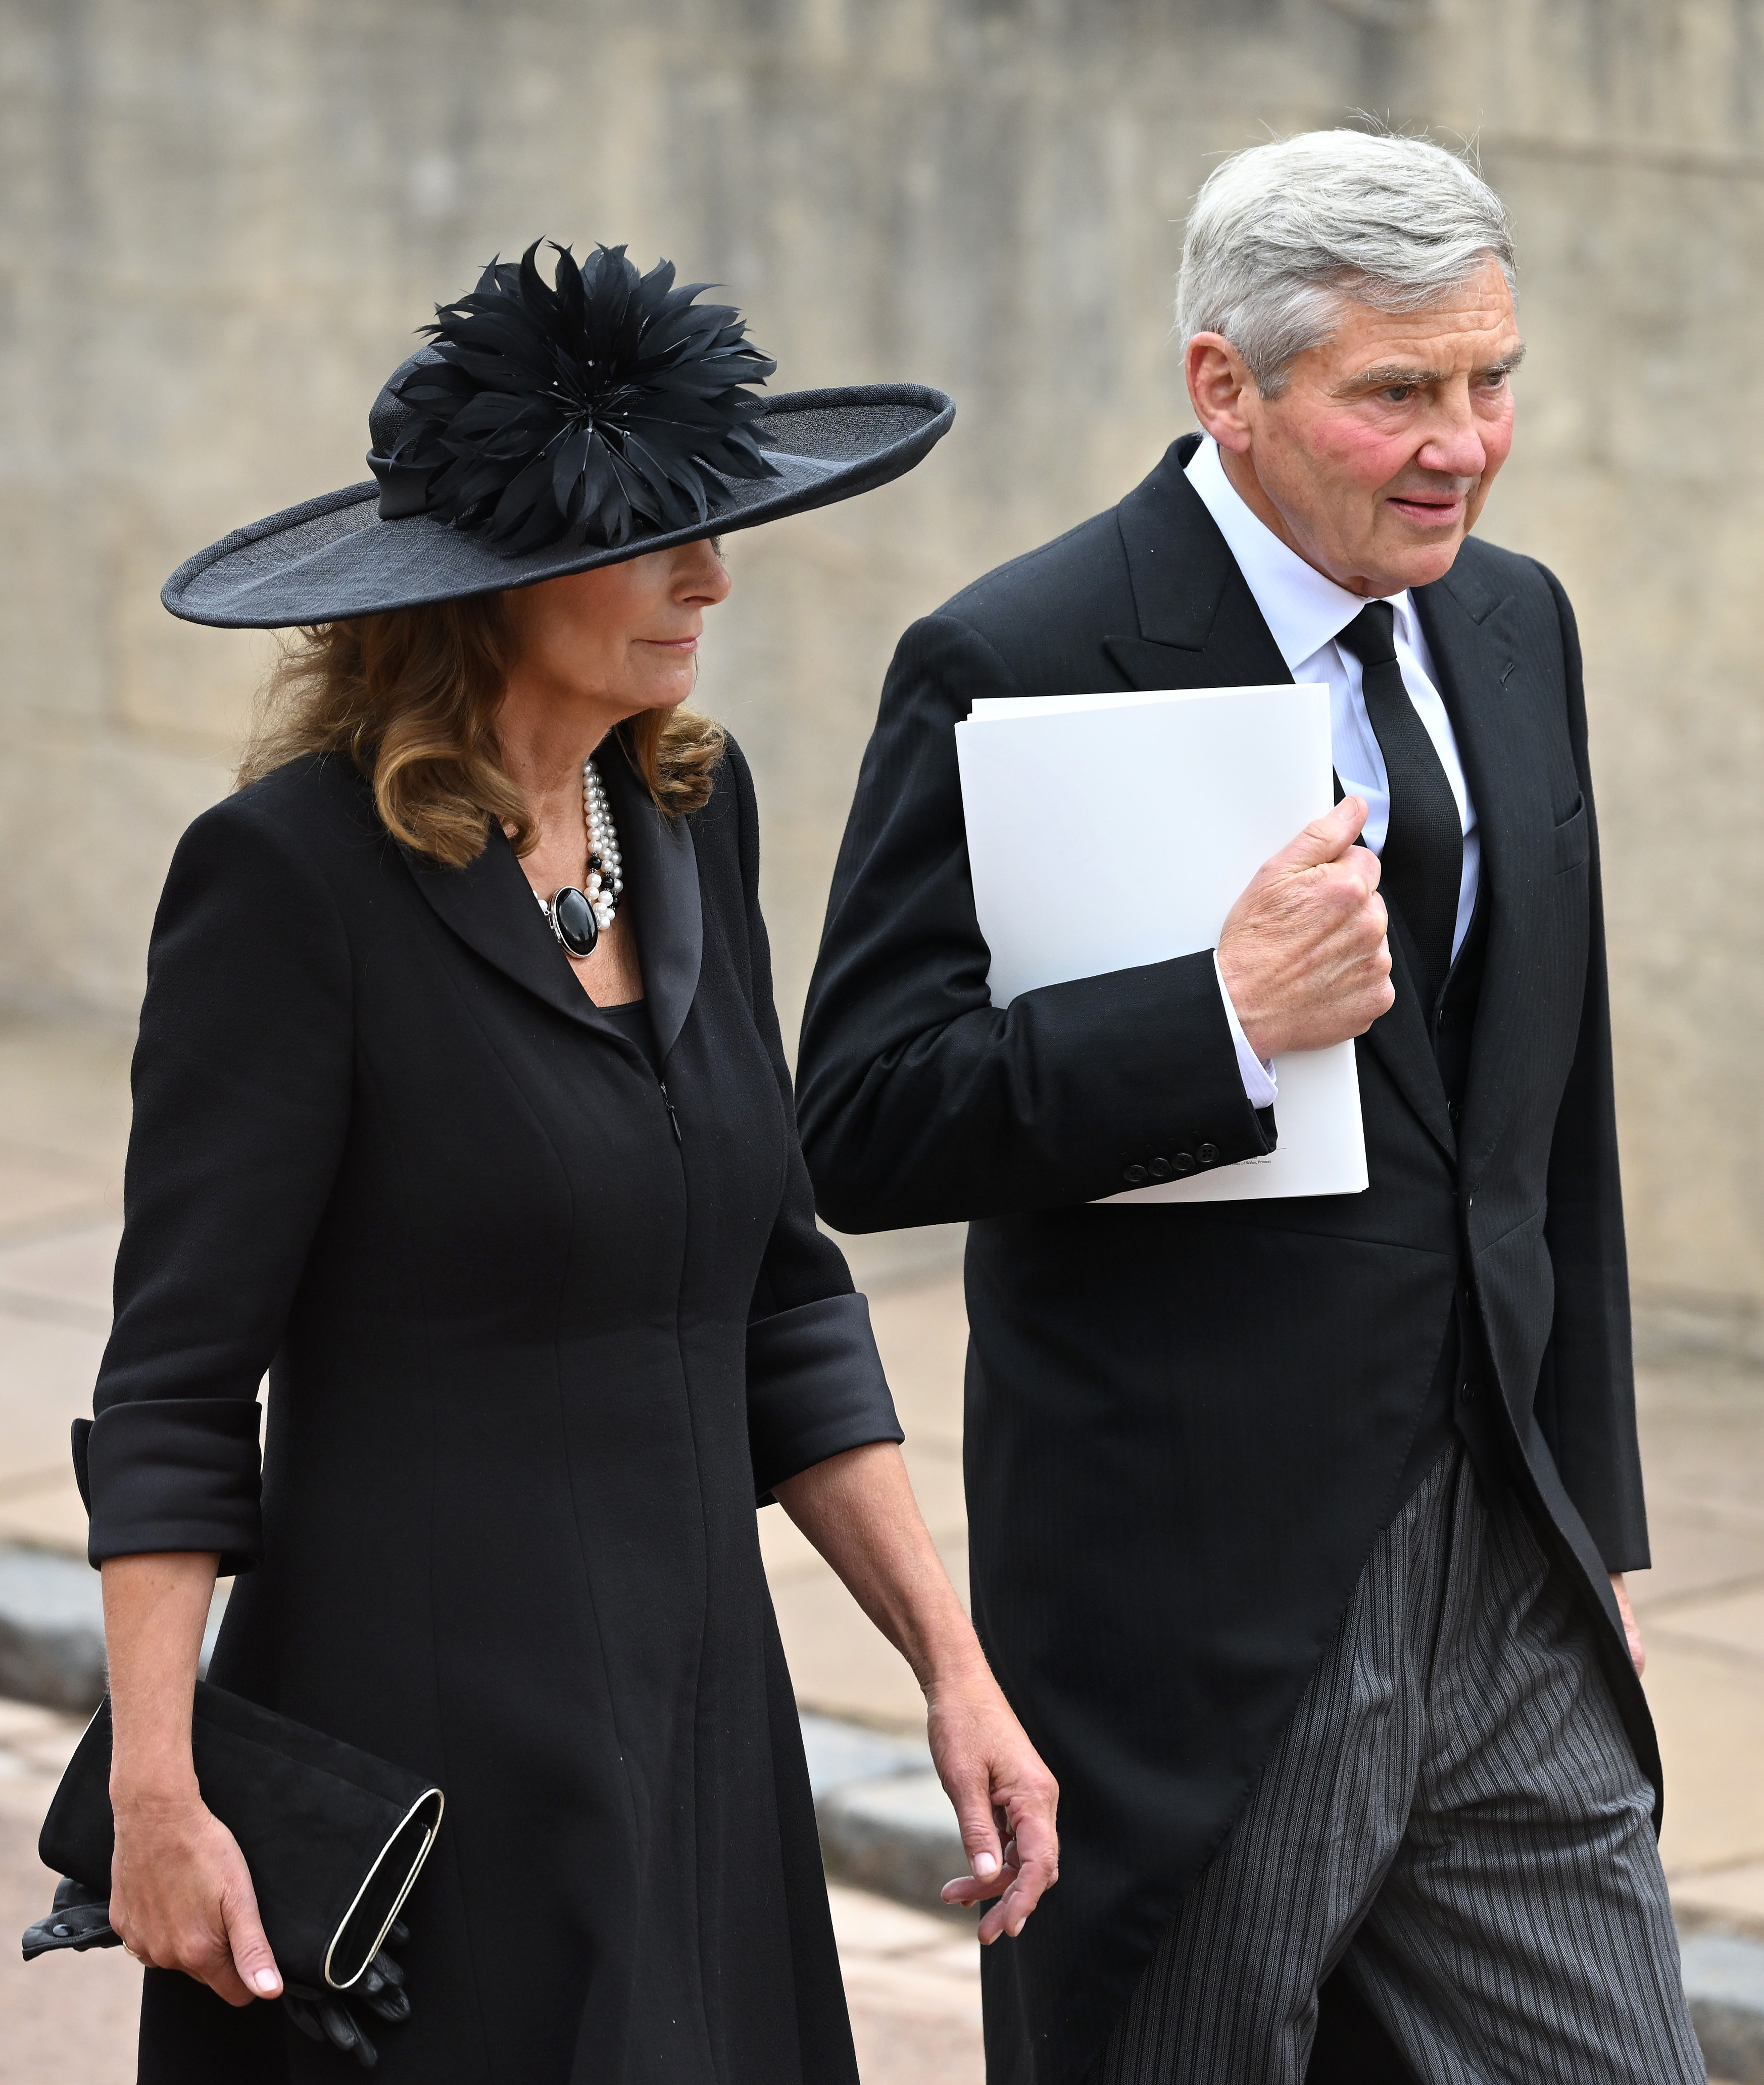 Carole and Michael Middleton arriving at the Committal Service for Queen Elizabeth II in Windsor, England on September 19, 2022 | Source: Getty Images